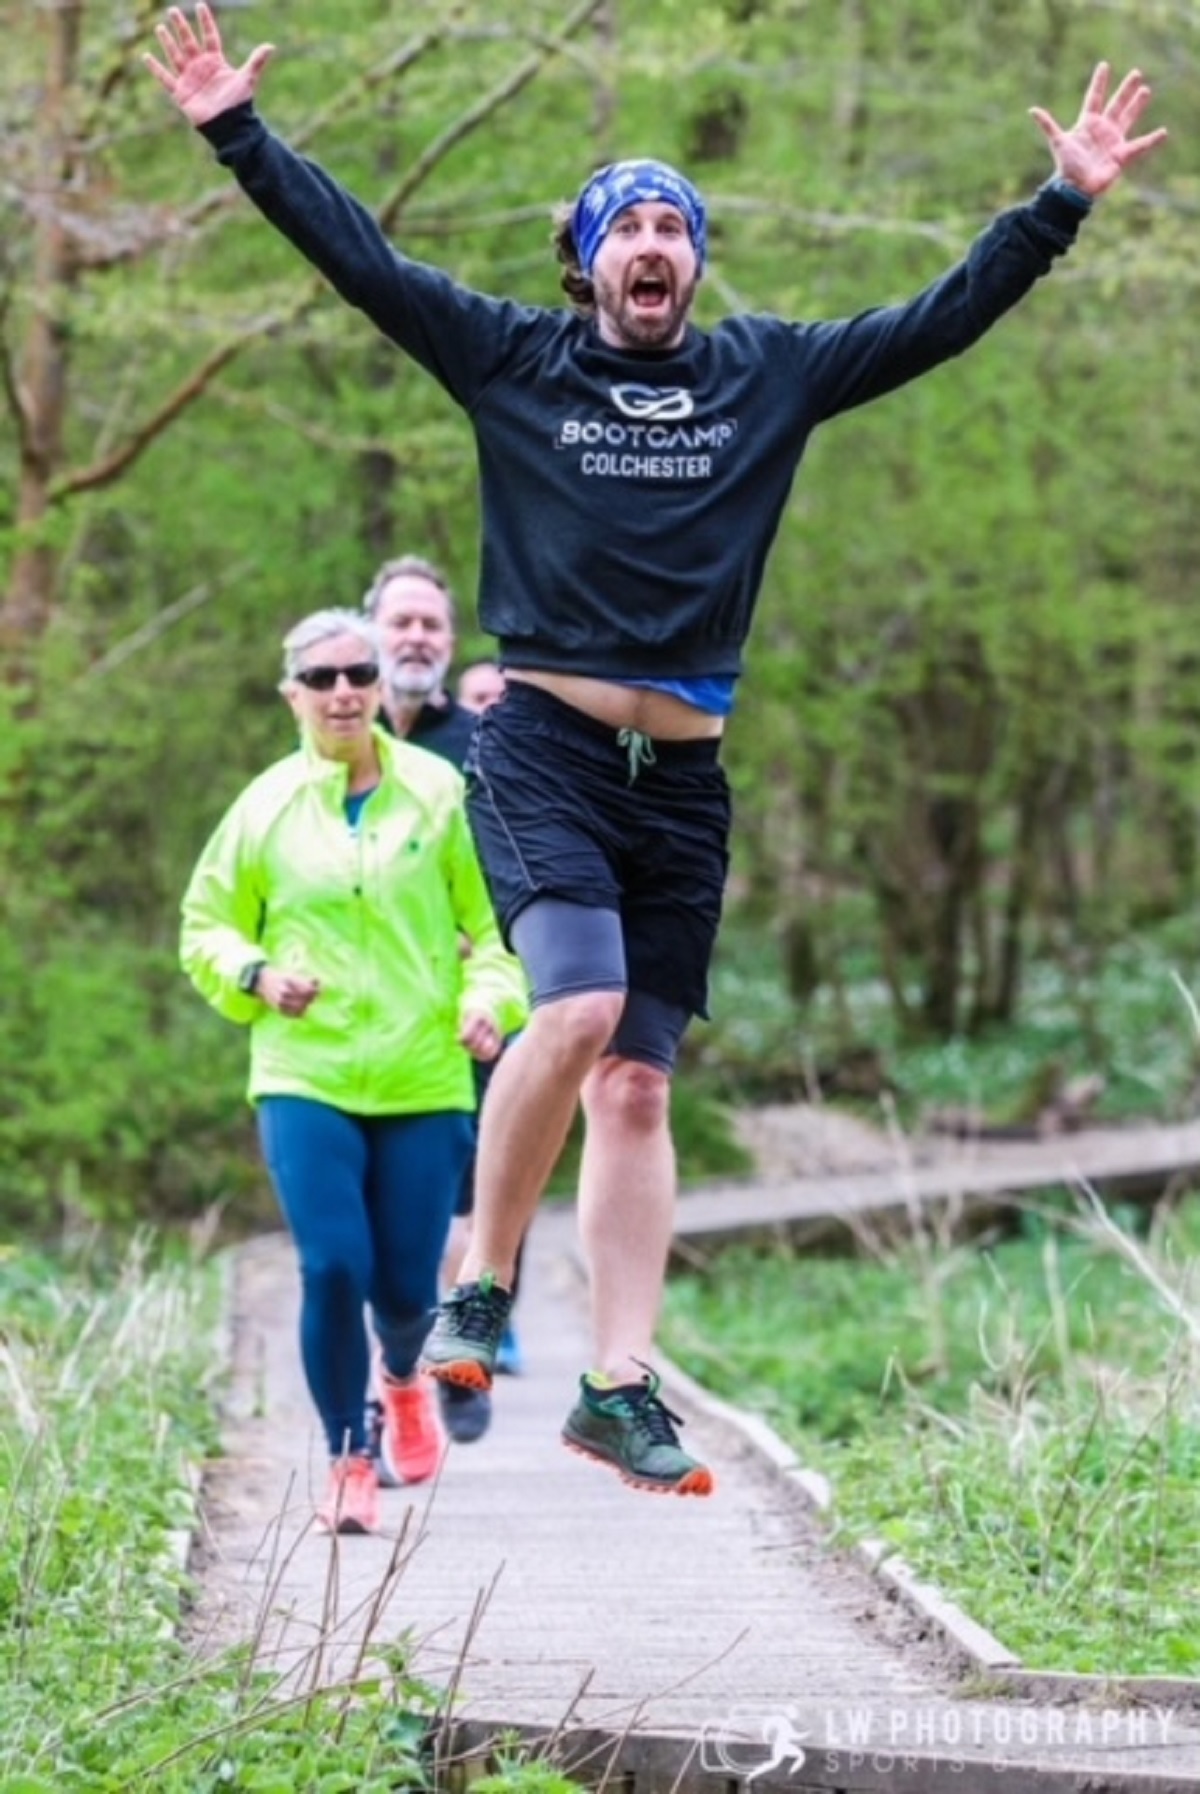 Jumping for joy - Lee Clarkson, from Colchester Bootcamp